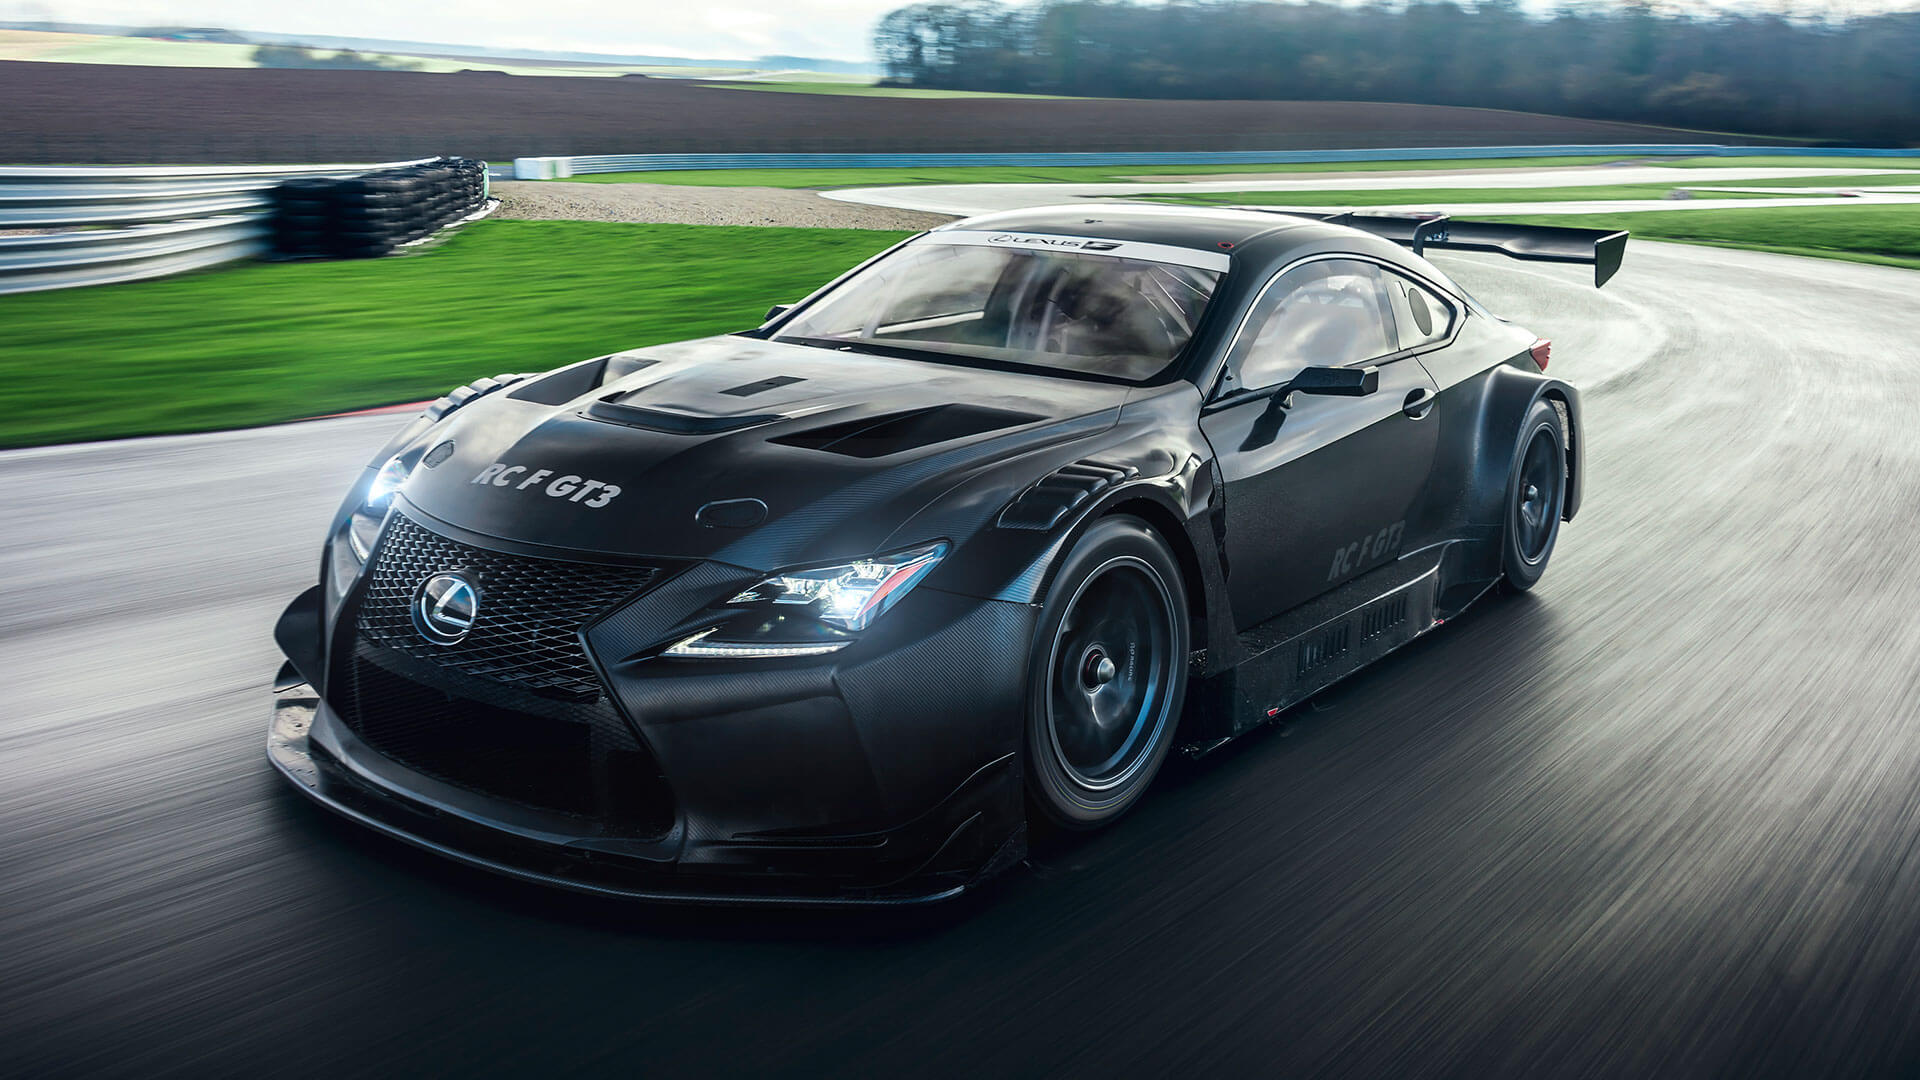 THE 2017 RC F GT3